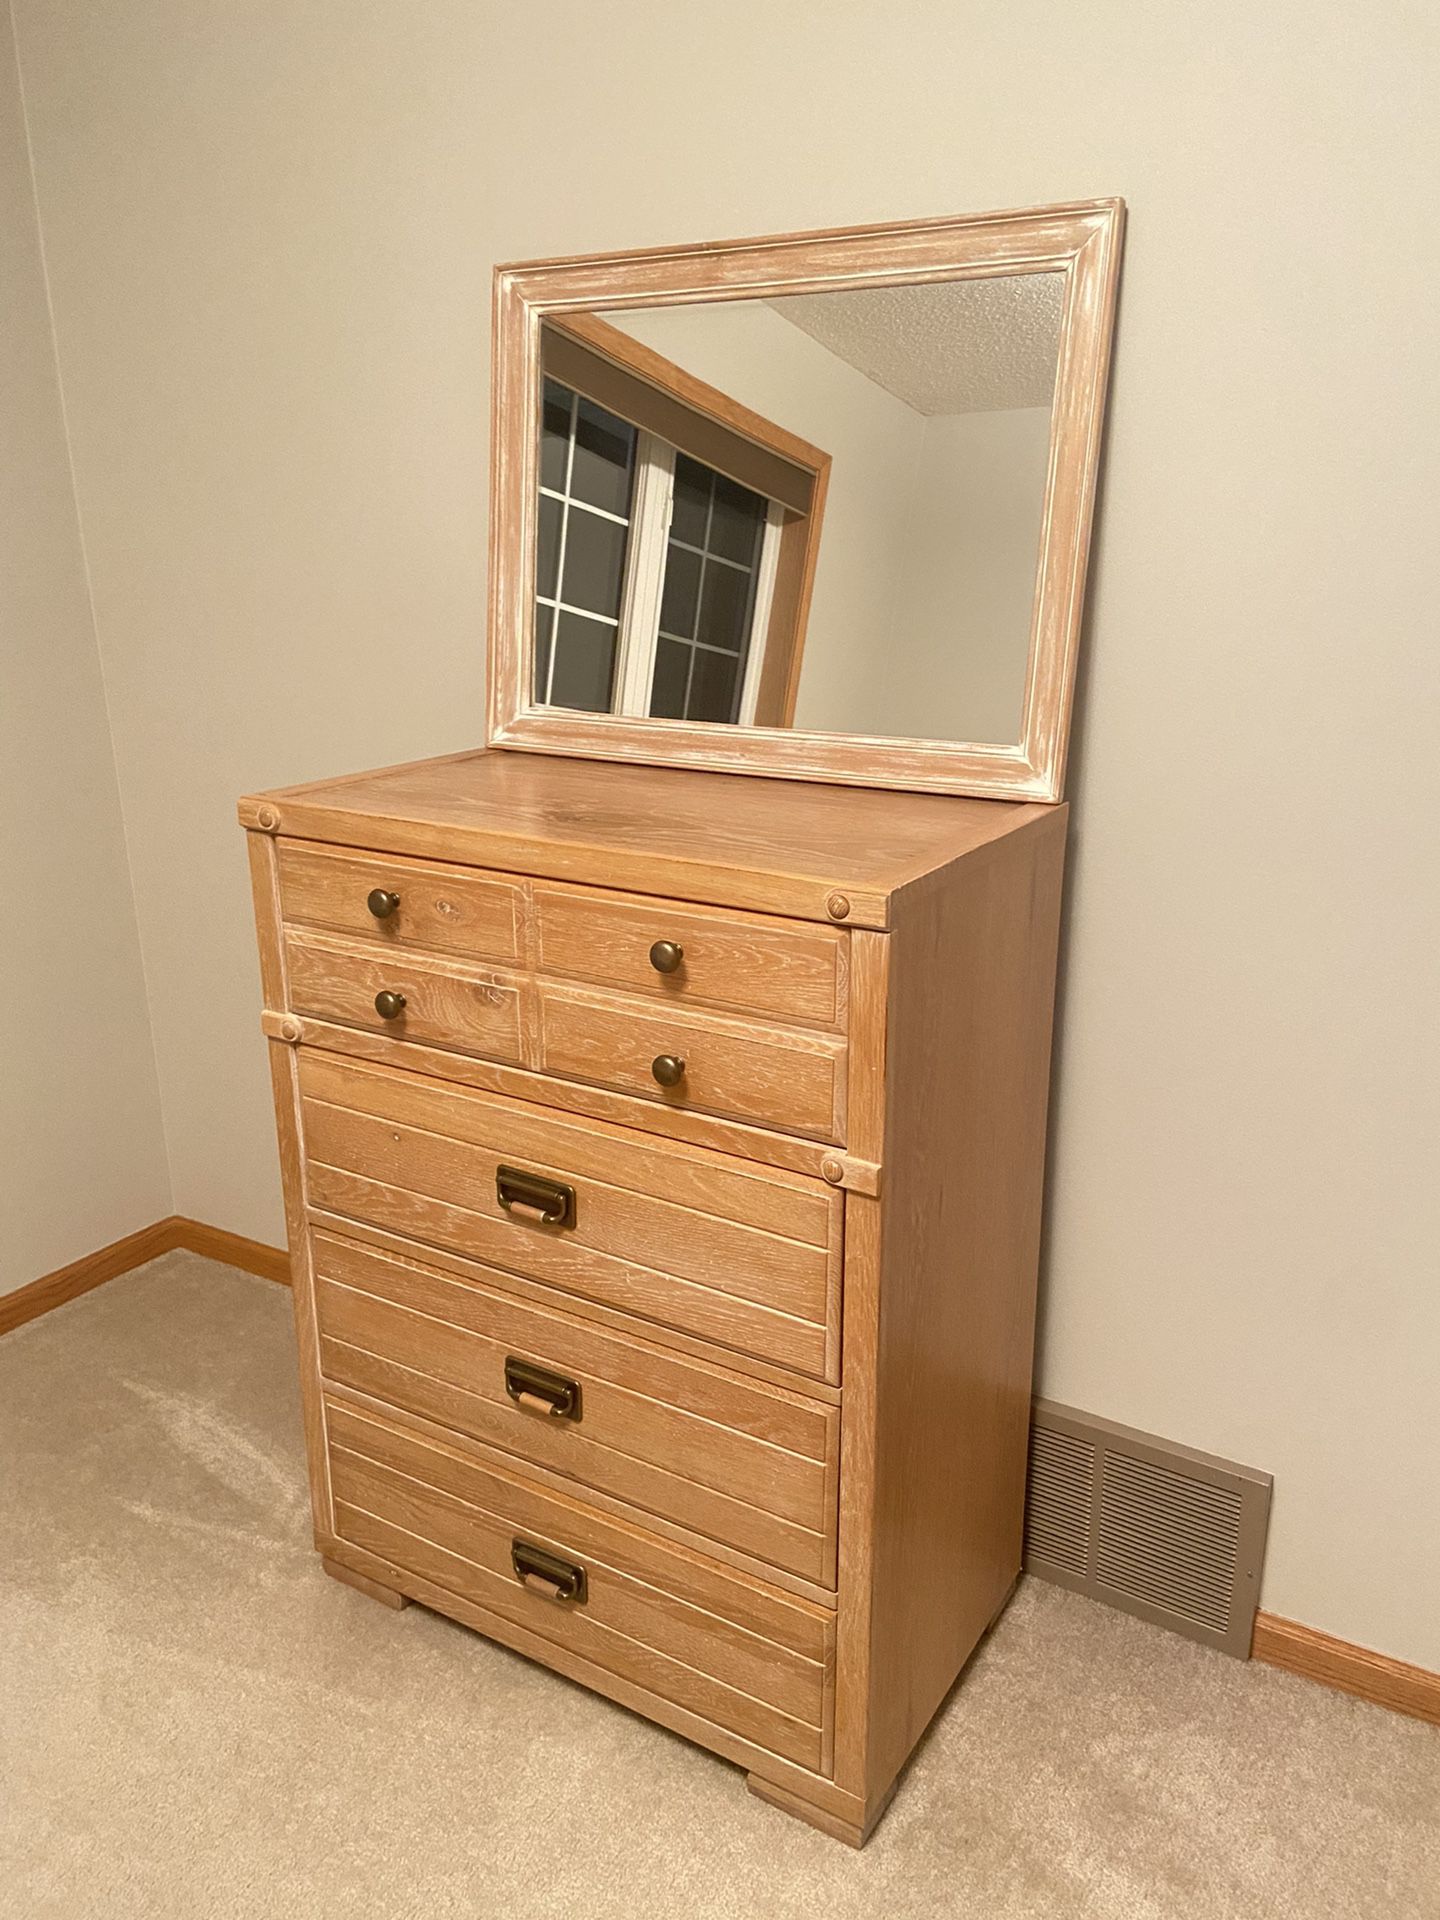 Bedroom Set - Desk And Hutch - 4 Drawer Chest With Mirror And Bed With Head Board. 